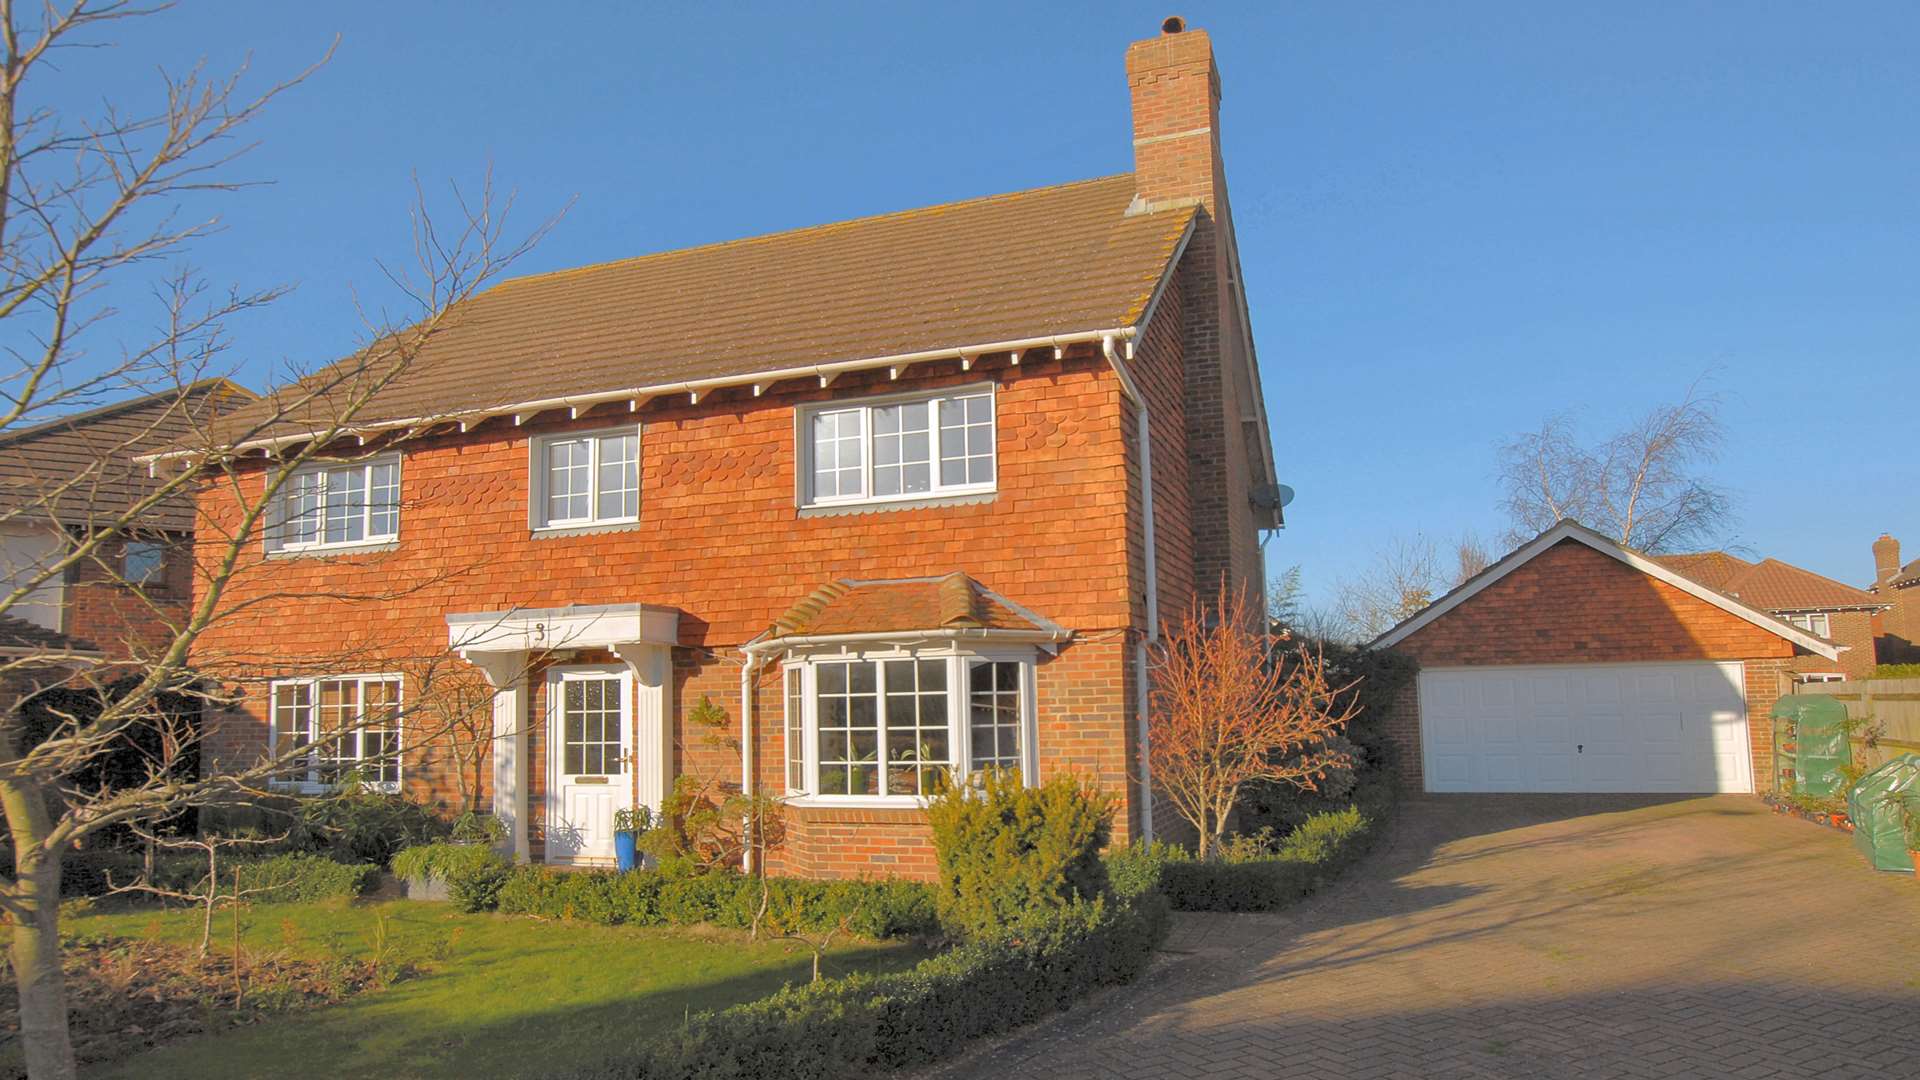 The property in Meadow Close, Hawkinge